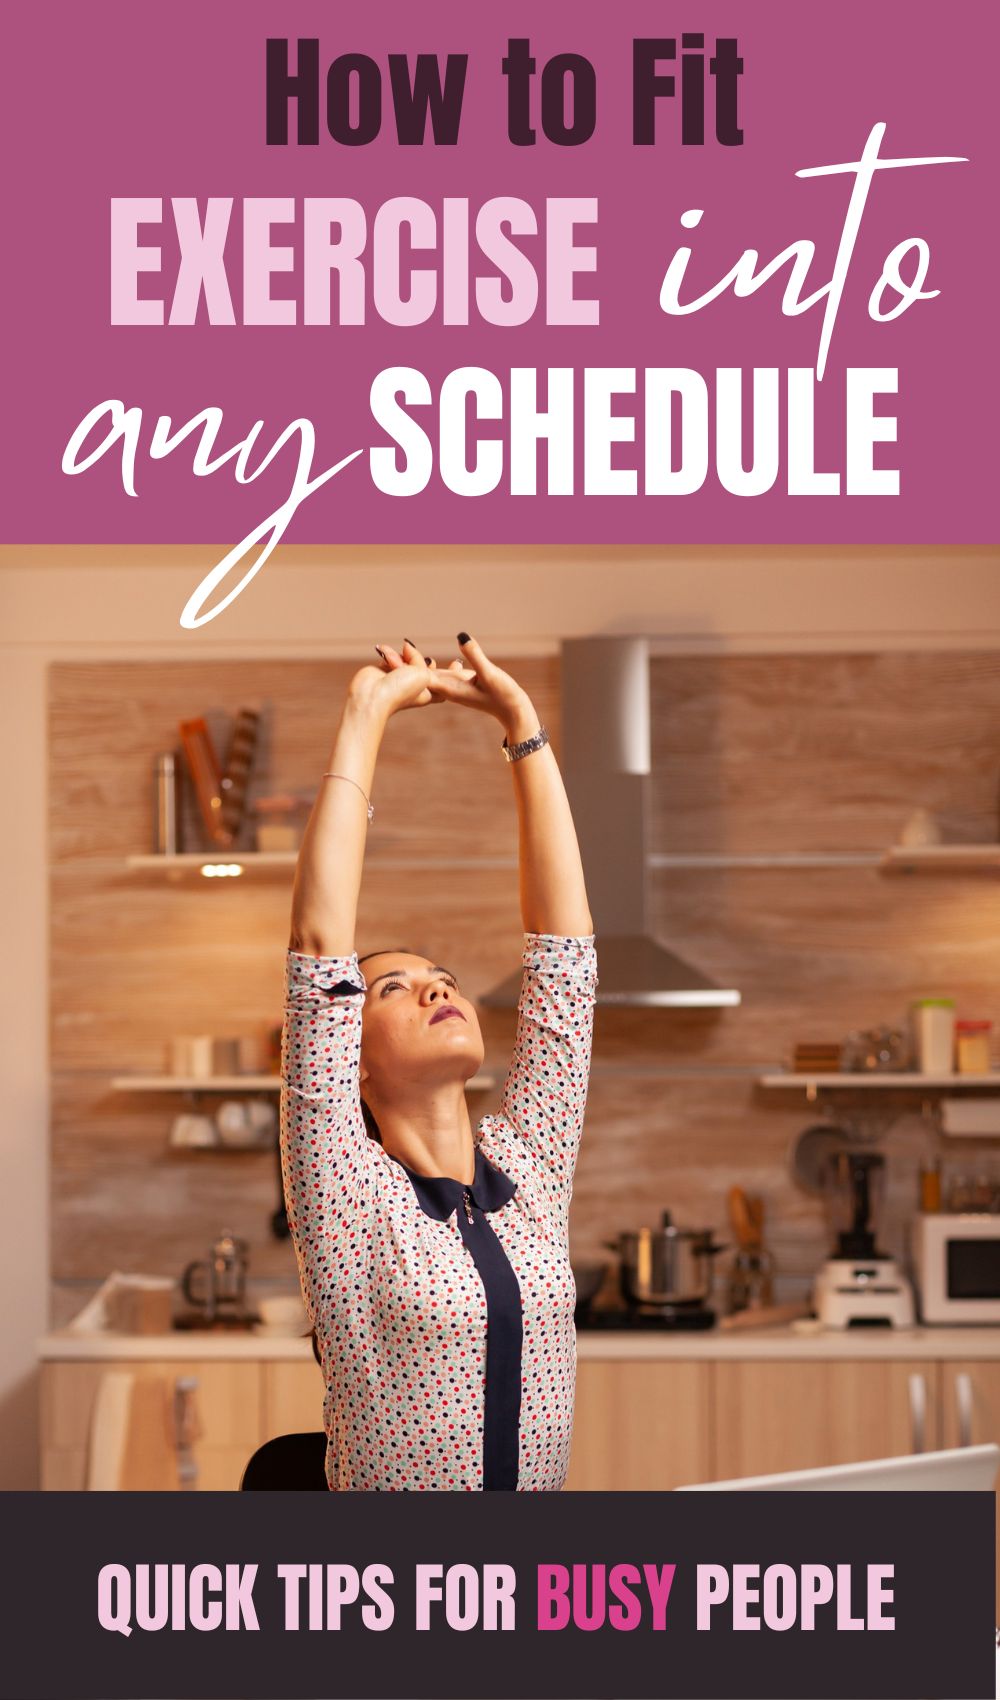 How to Fit Exercise into Any Schedule: Quick Tips for Busy People